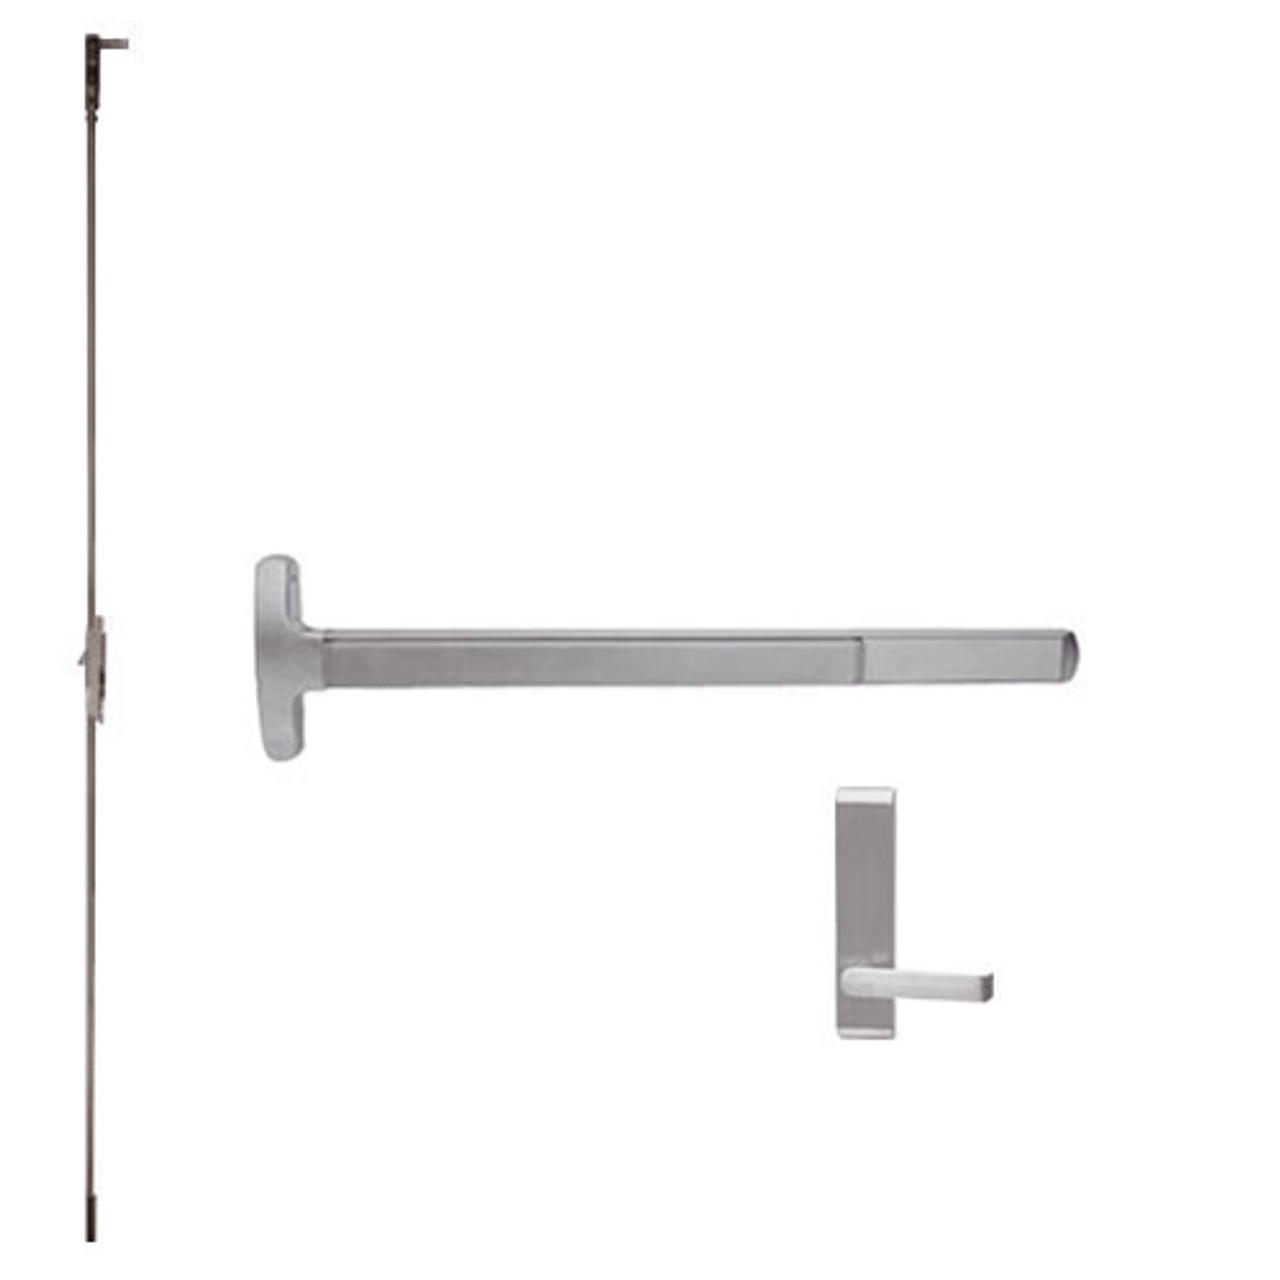 F-24-C-L-BE-DANE-US32D-3-LHR Falcon Exit Device in Satin Stainless Steel